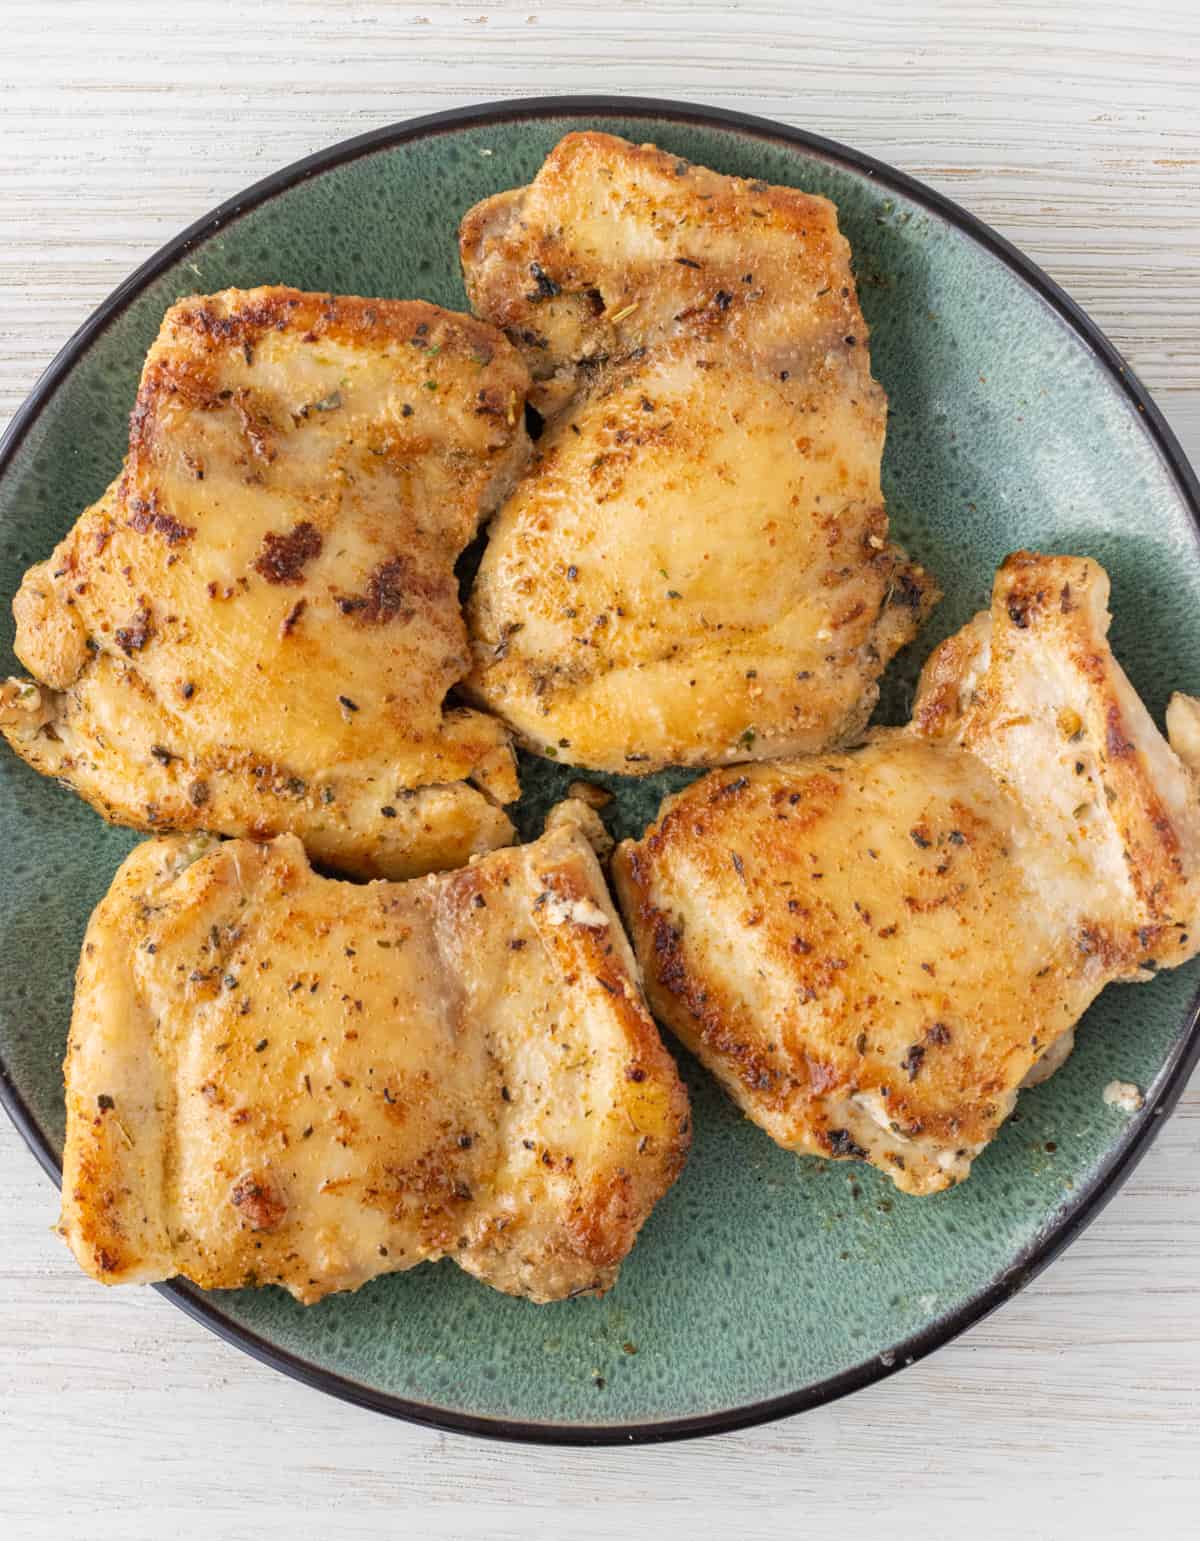 Four browned chicken thighs on a plate.